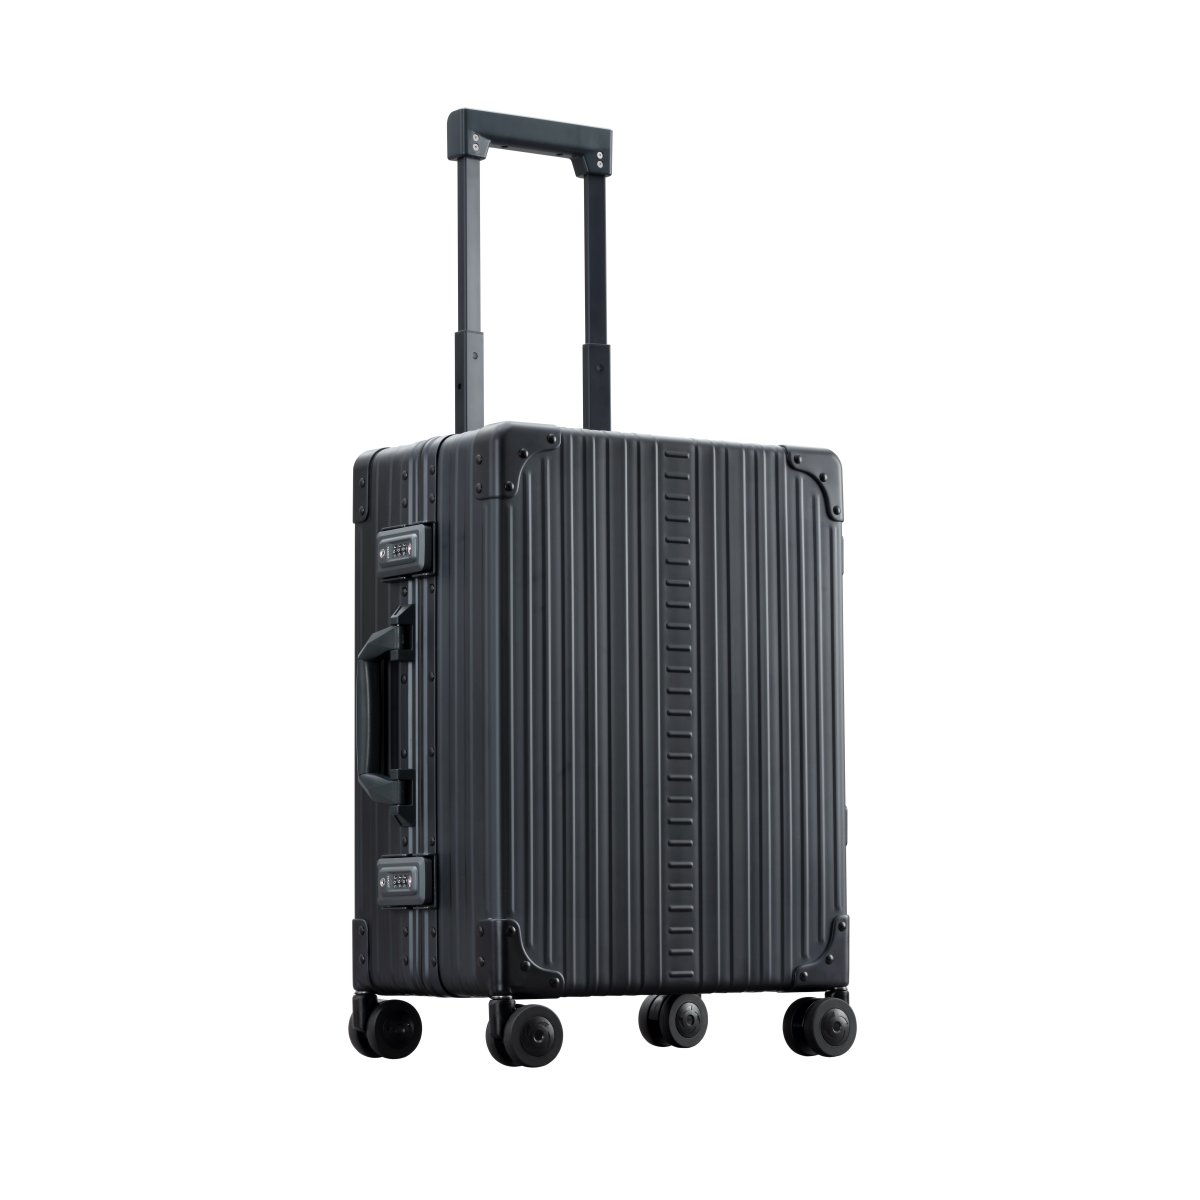 Domestic Carry-On 21" Koffer in Onyx von Aleon